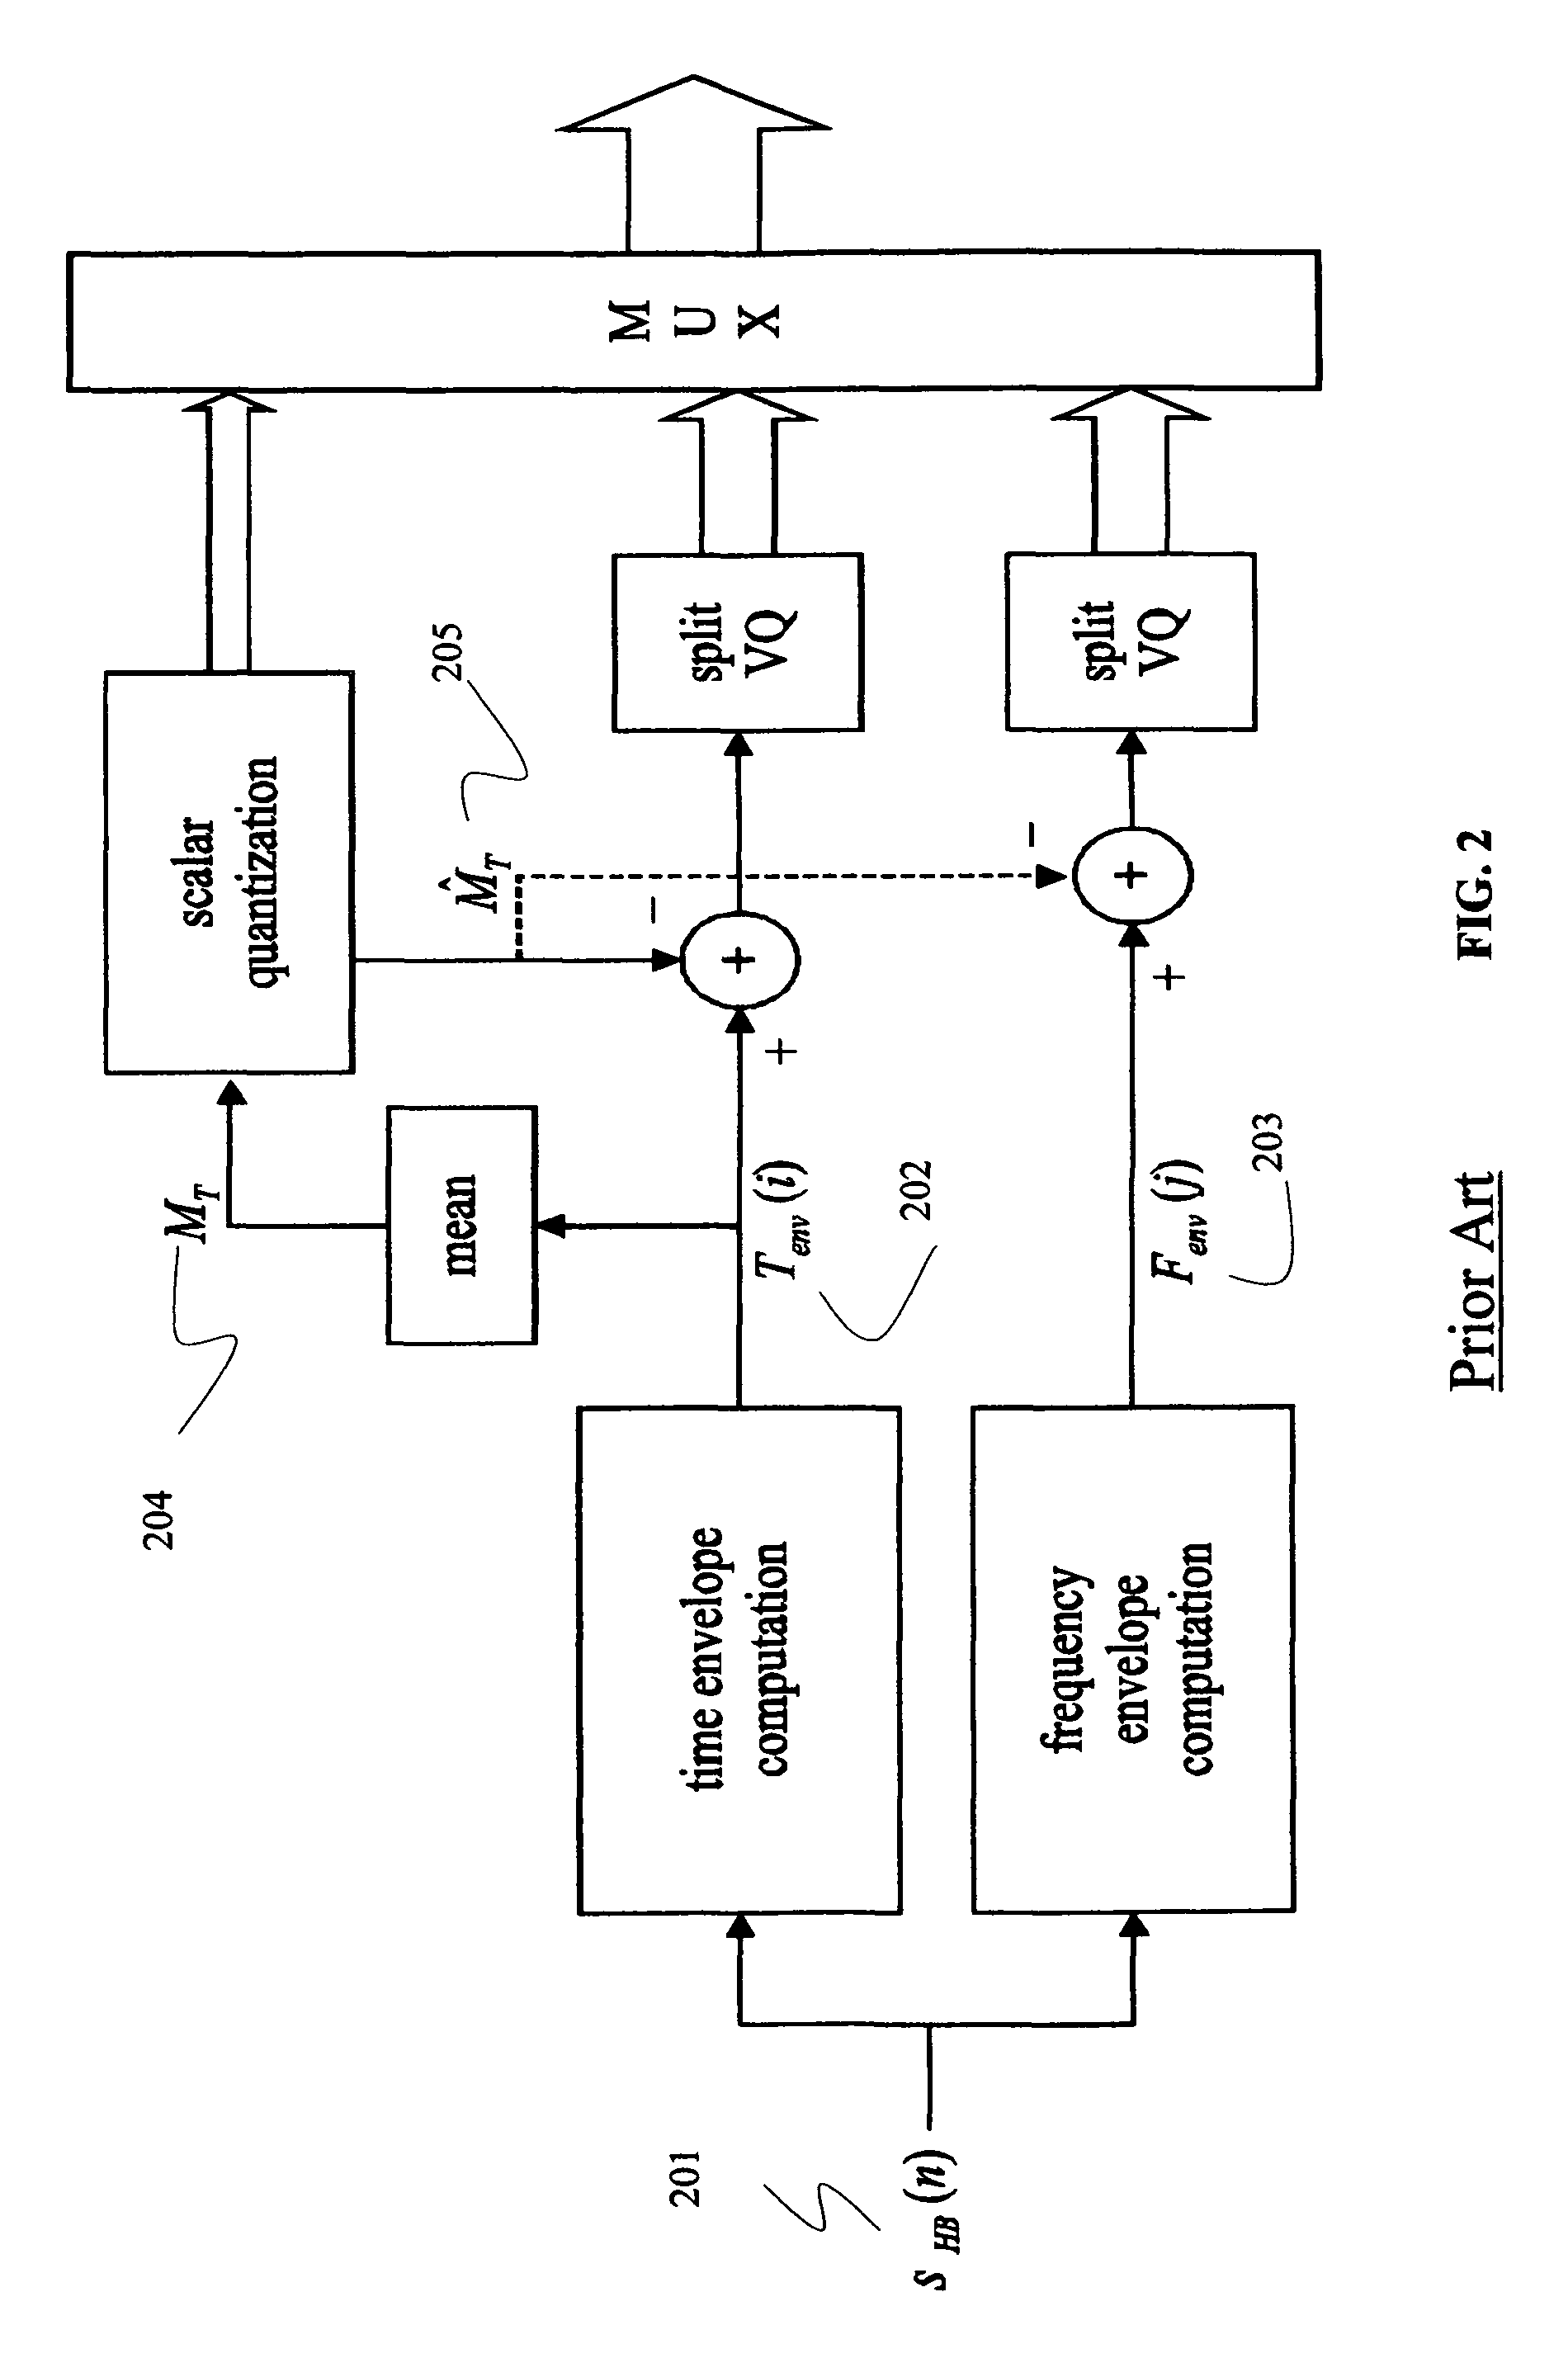 Method for classifying audio signal into fast signal or slow signal